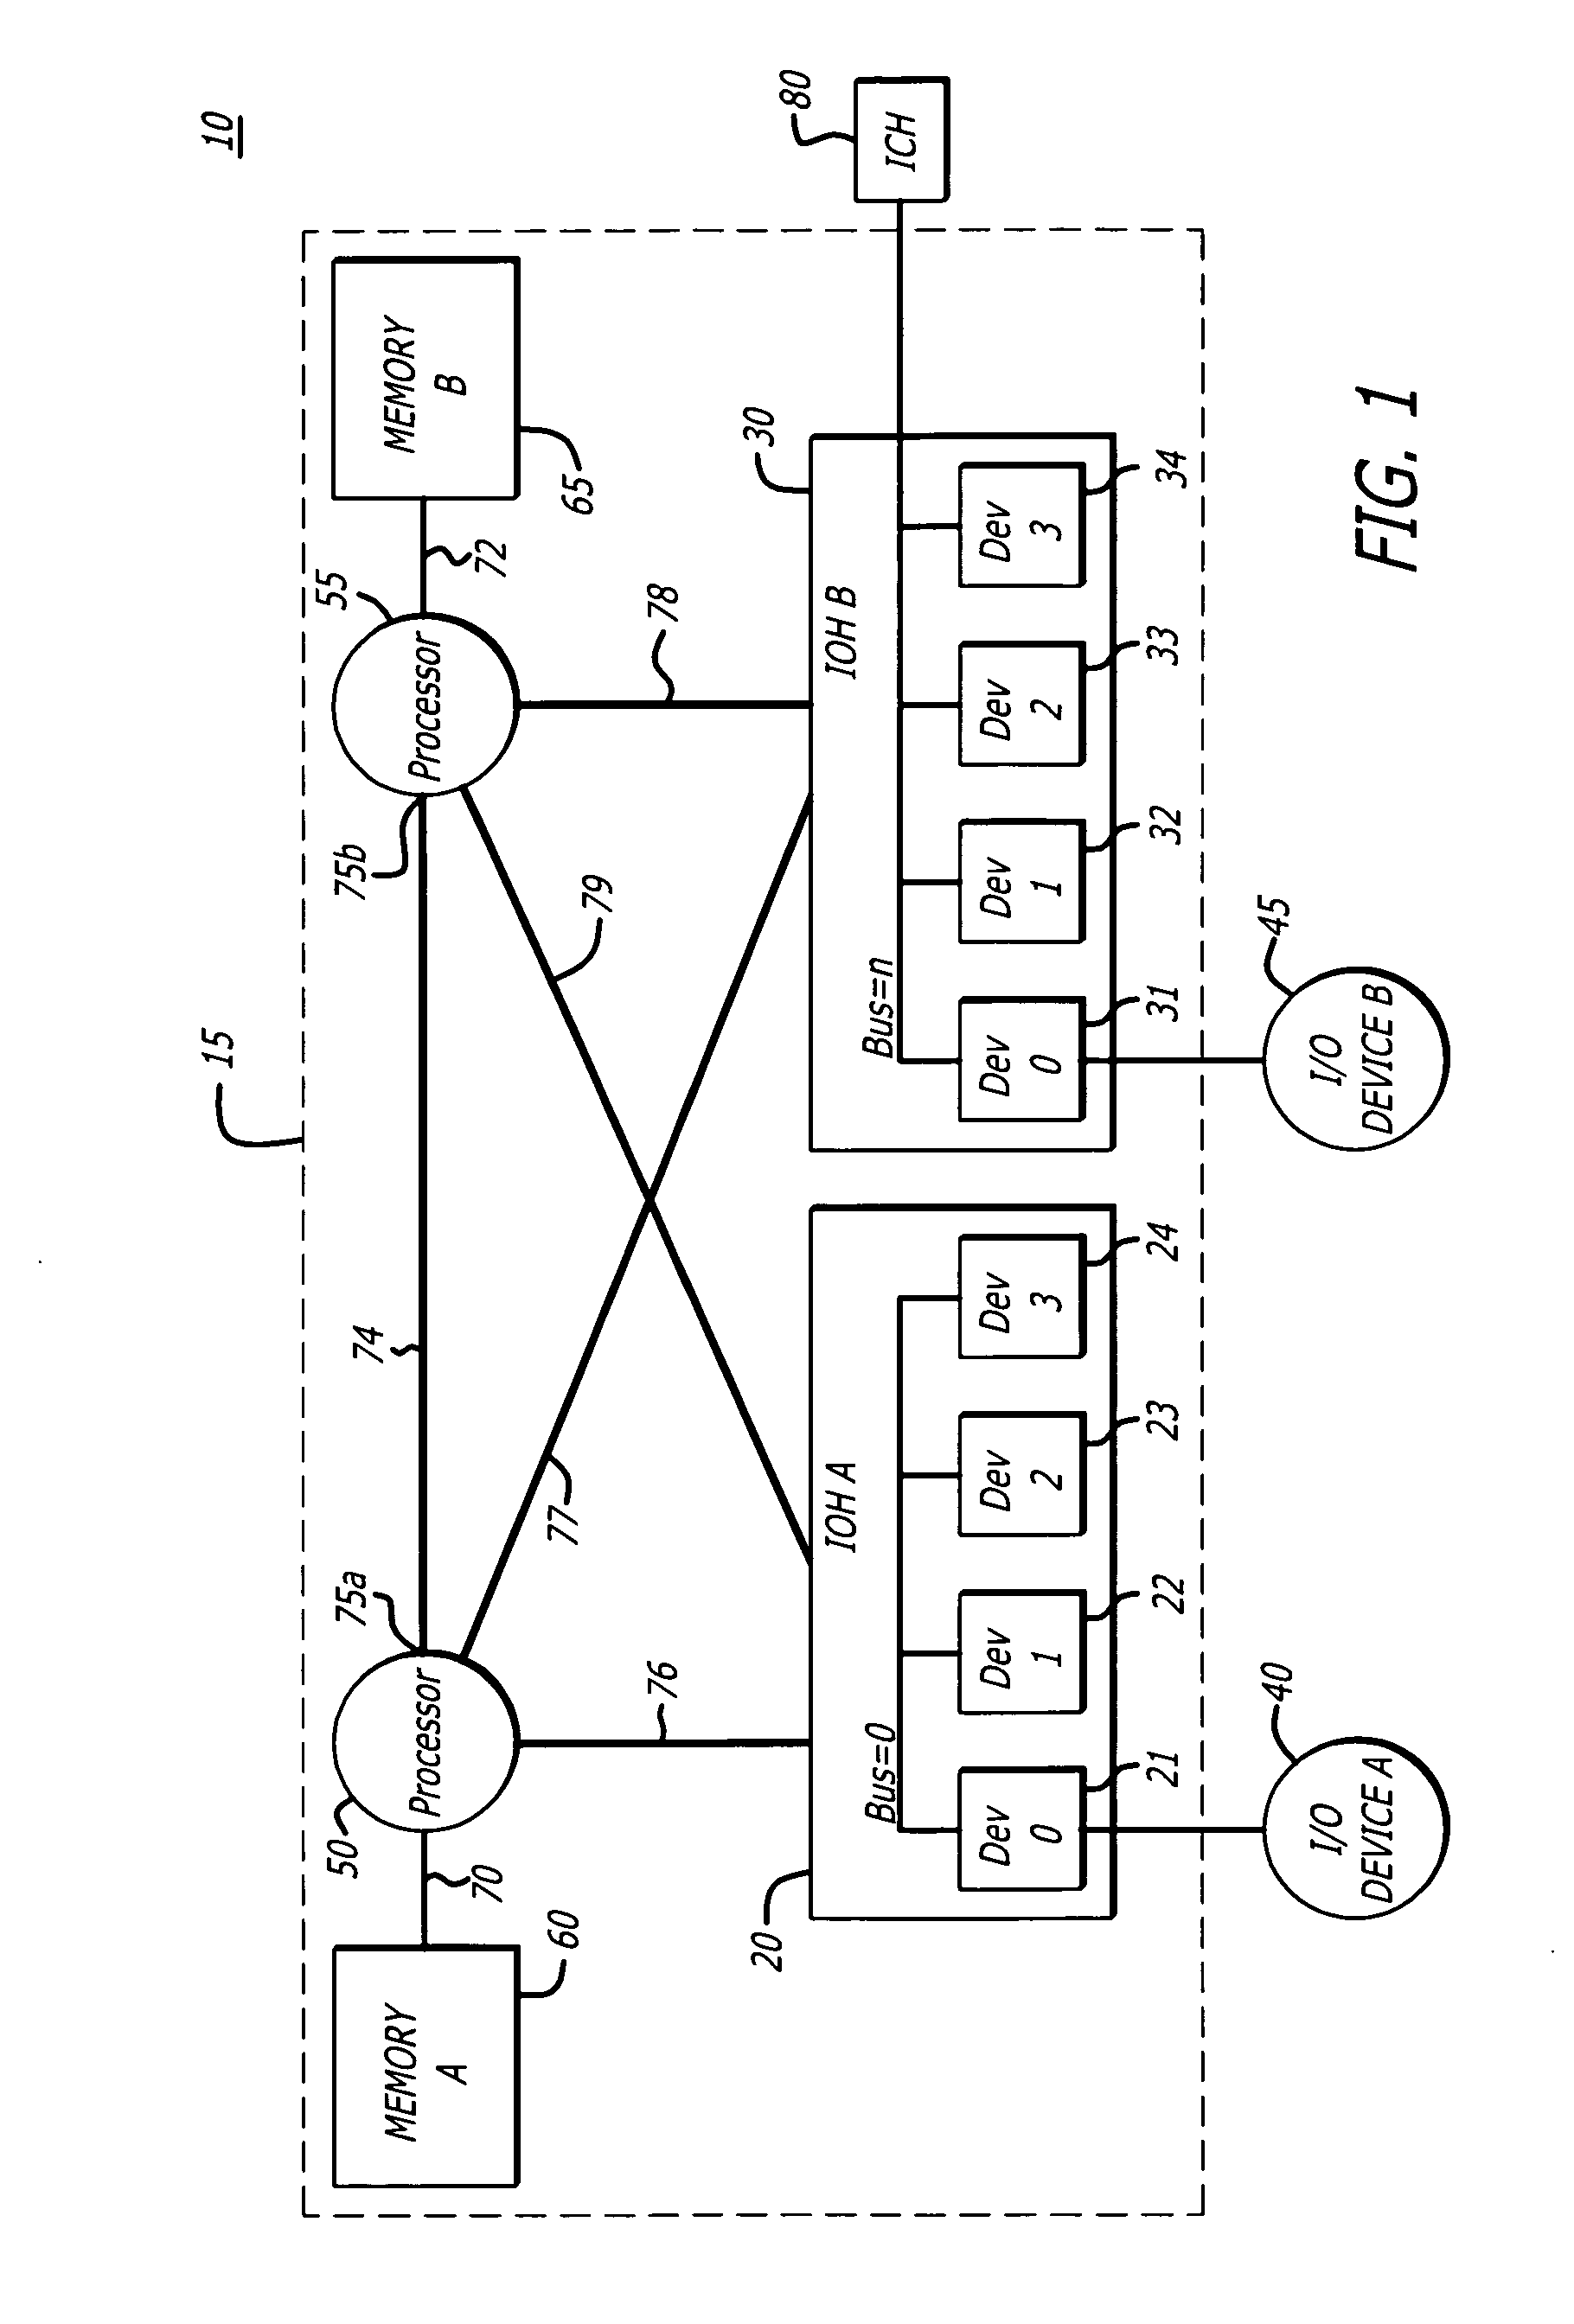 Method and apparatus for flow control initialization